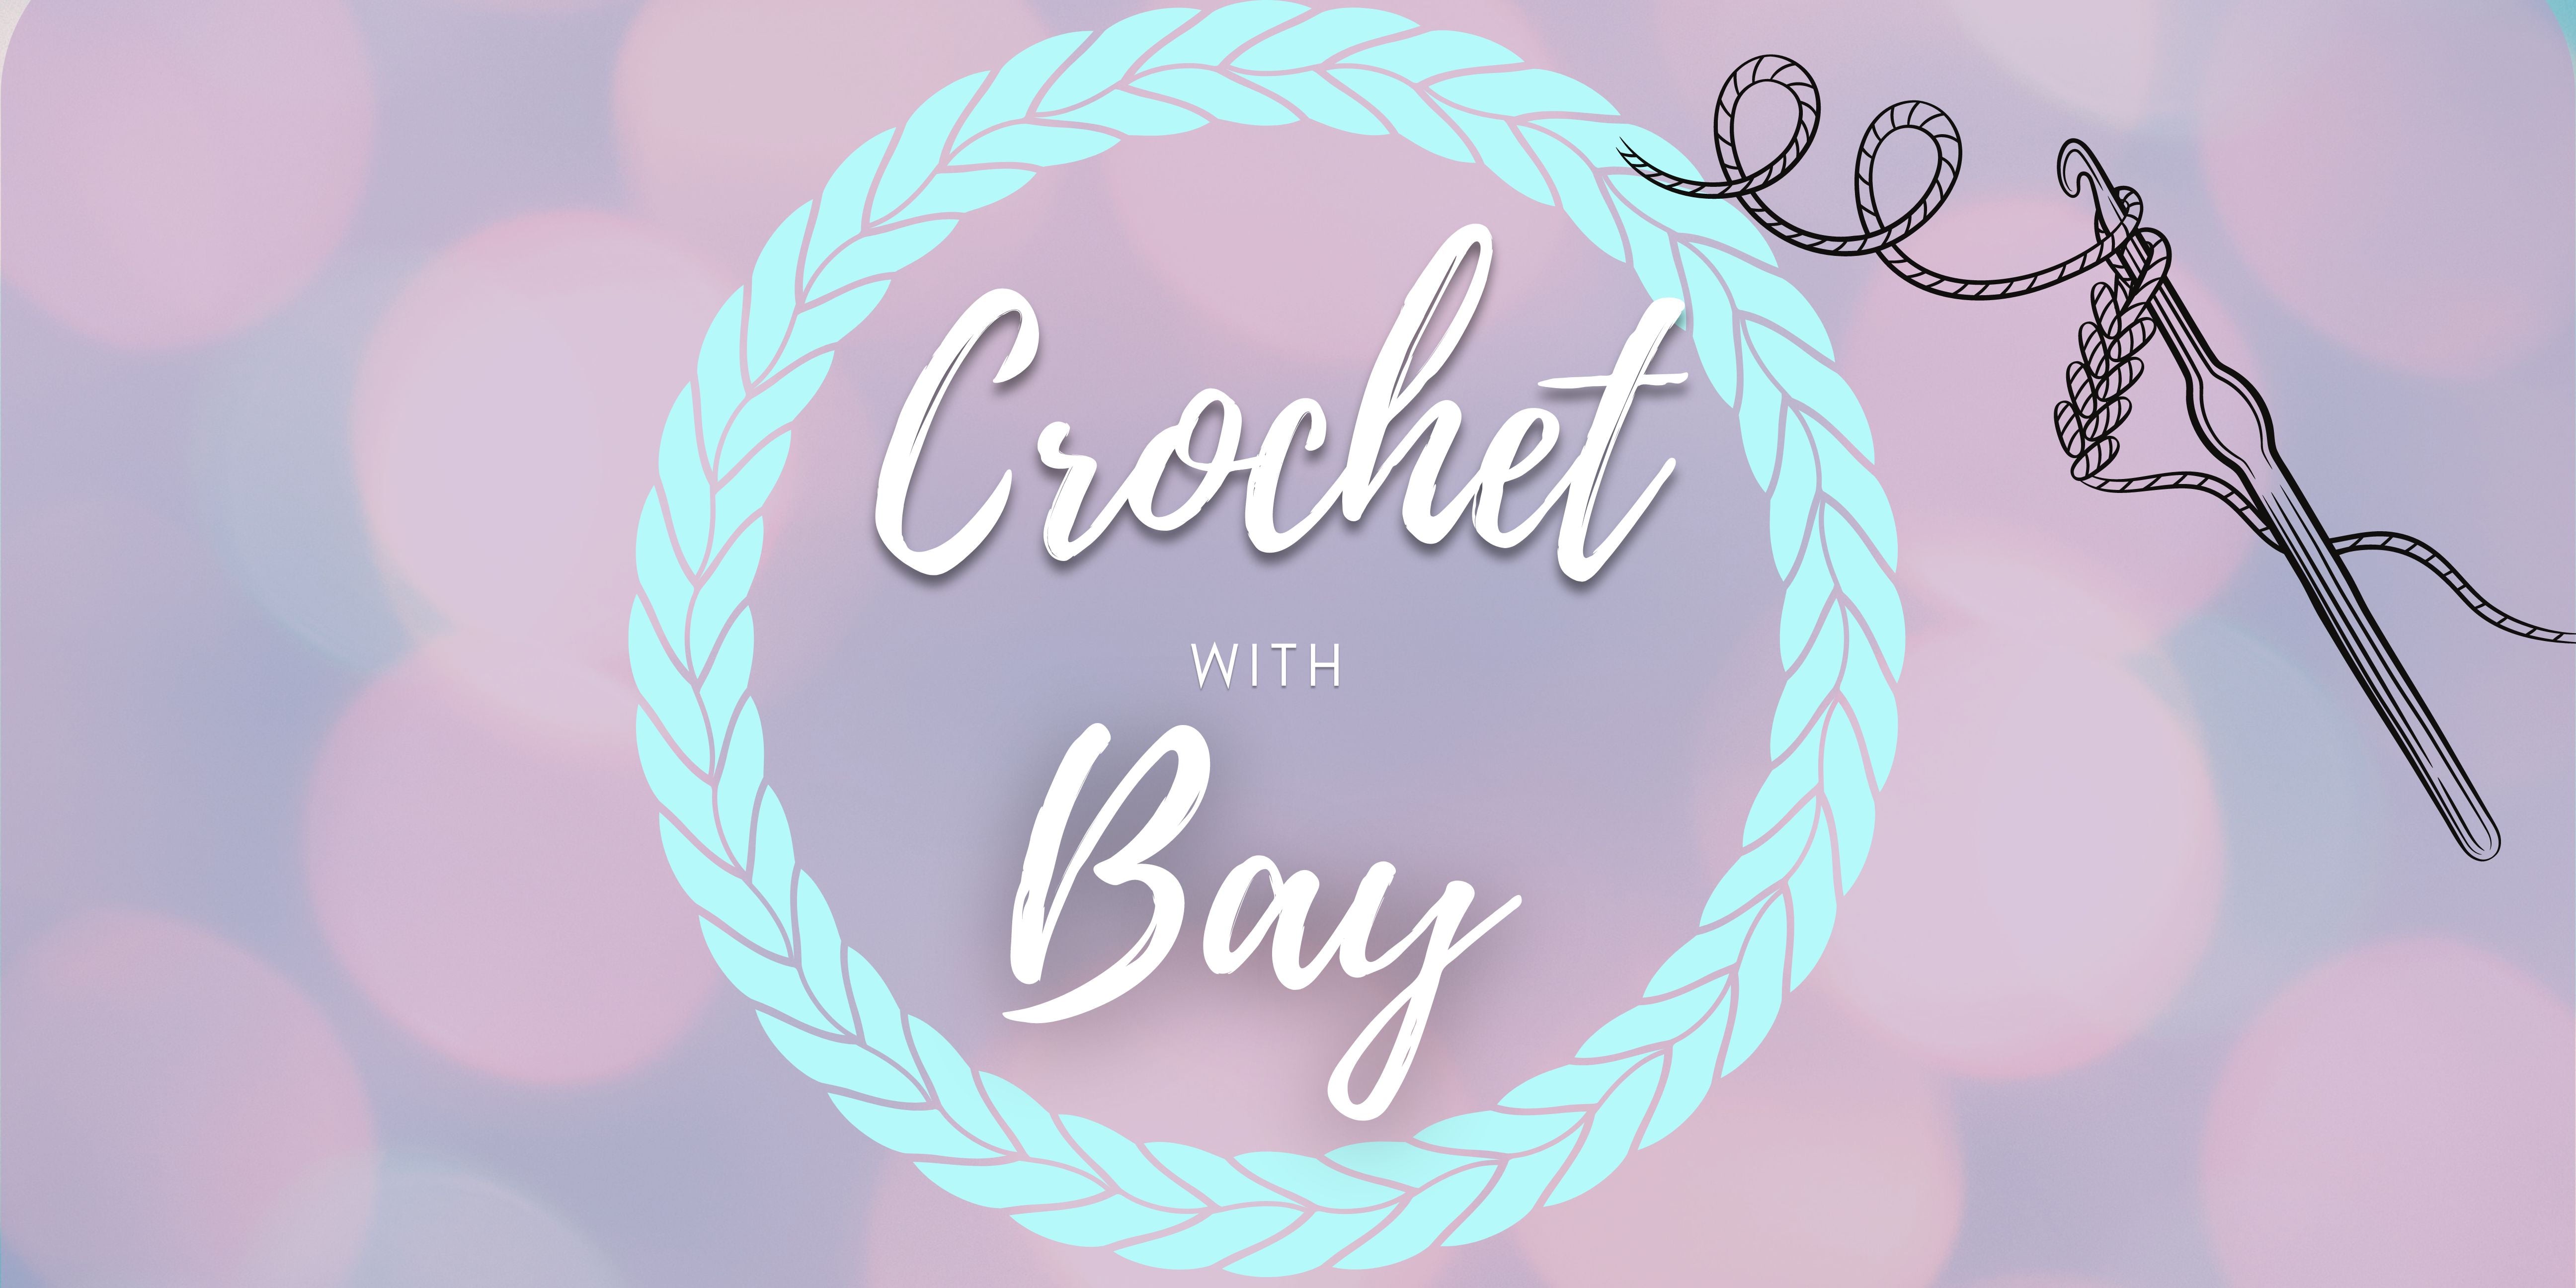 Crochet With Bay